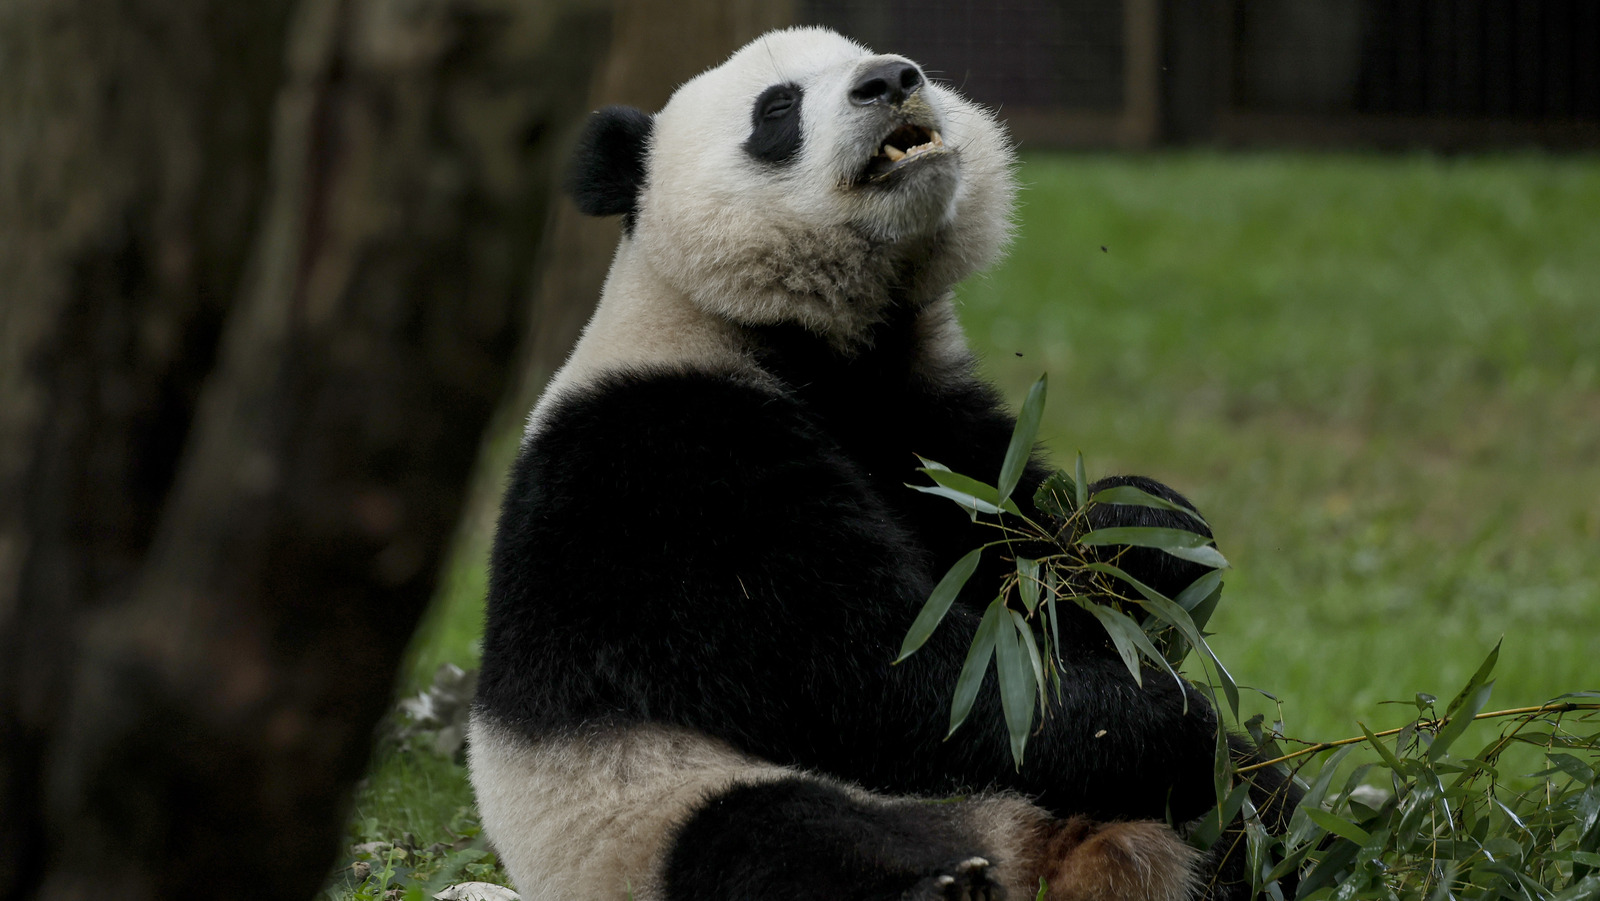 The Giant Panda Who Successfully Faked A Pregnancy To Receive Special